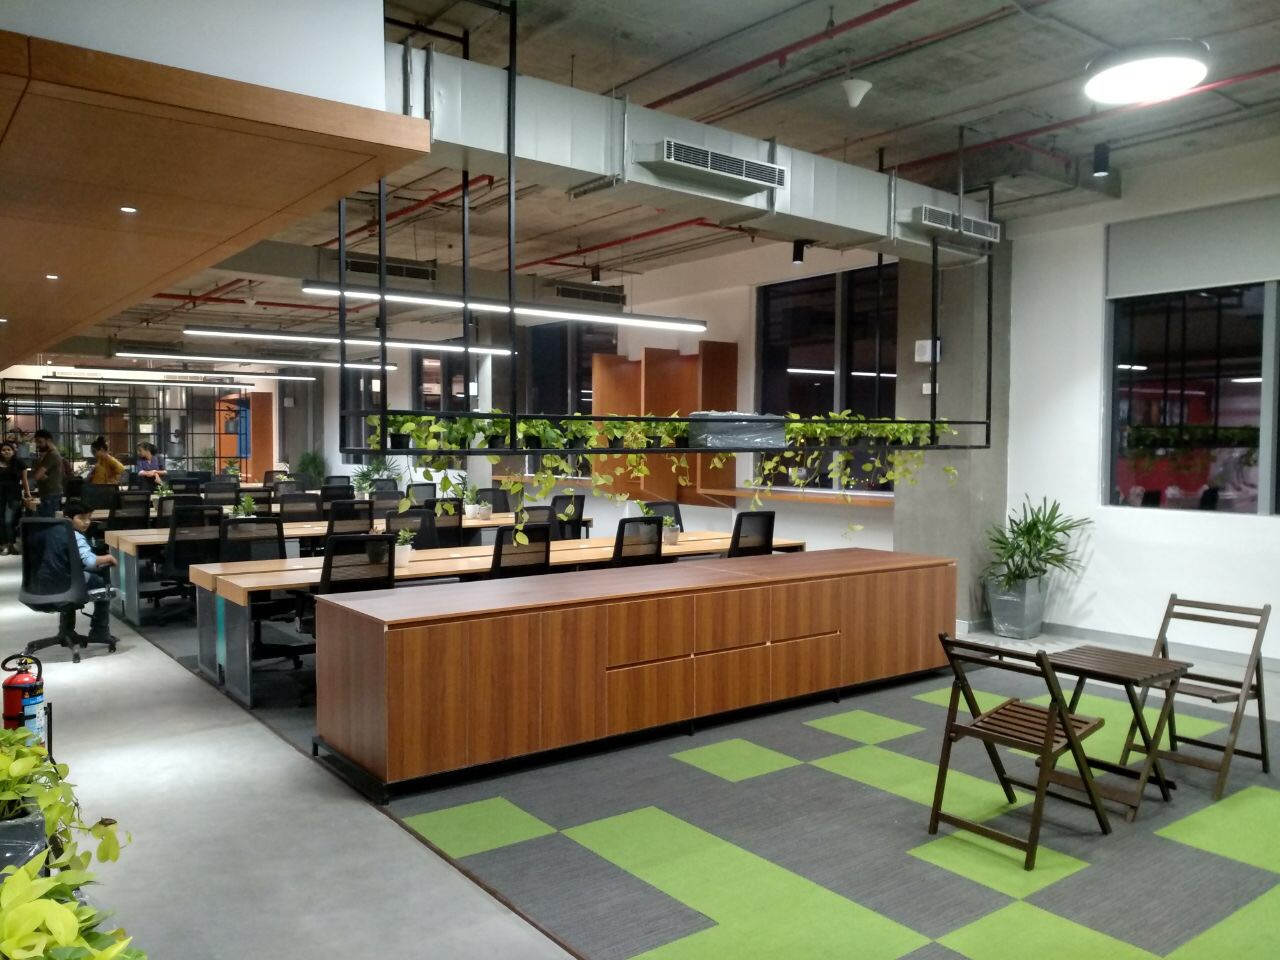 How can serviced offices help you in streamlining your business?